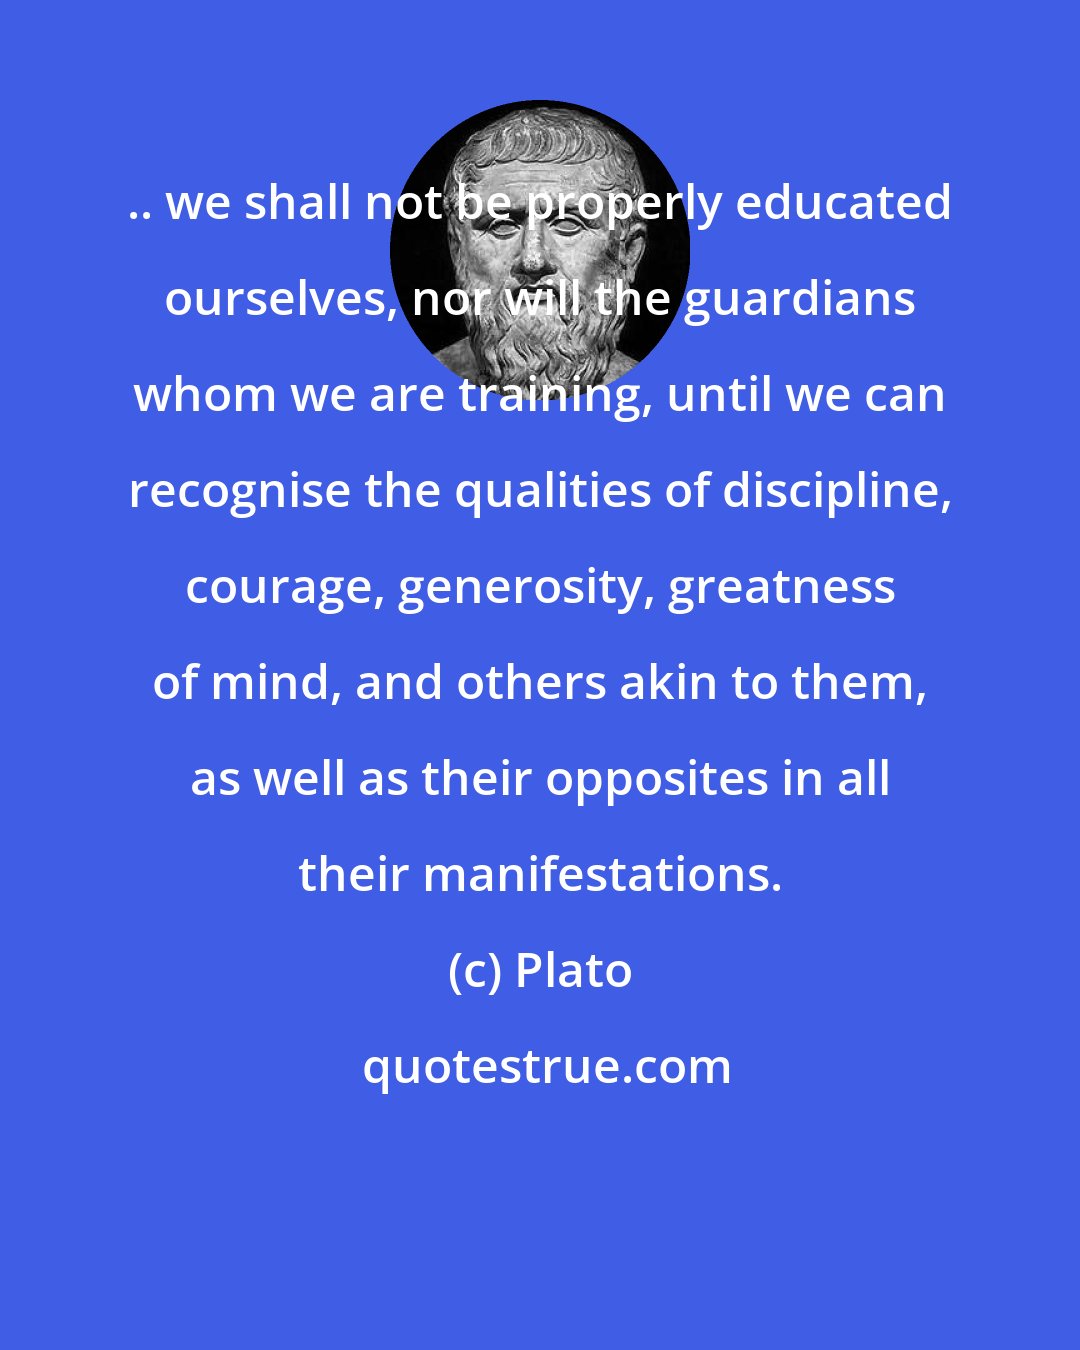 Plato: .. we shall not be properly educated ourselves, nor will the guardians whom we are training, until we can recognise the qualities of discipline, courage, generosity, greatness of mind, and others akin to them, as well as their opposites in all their manifestations.